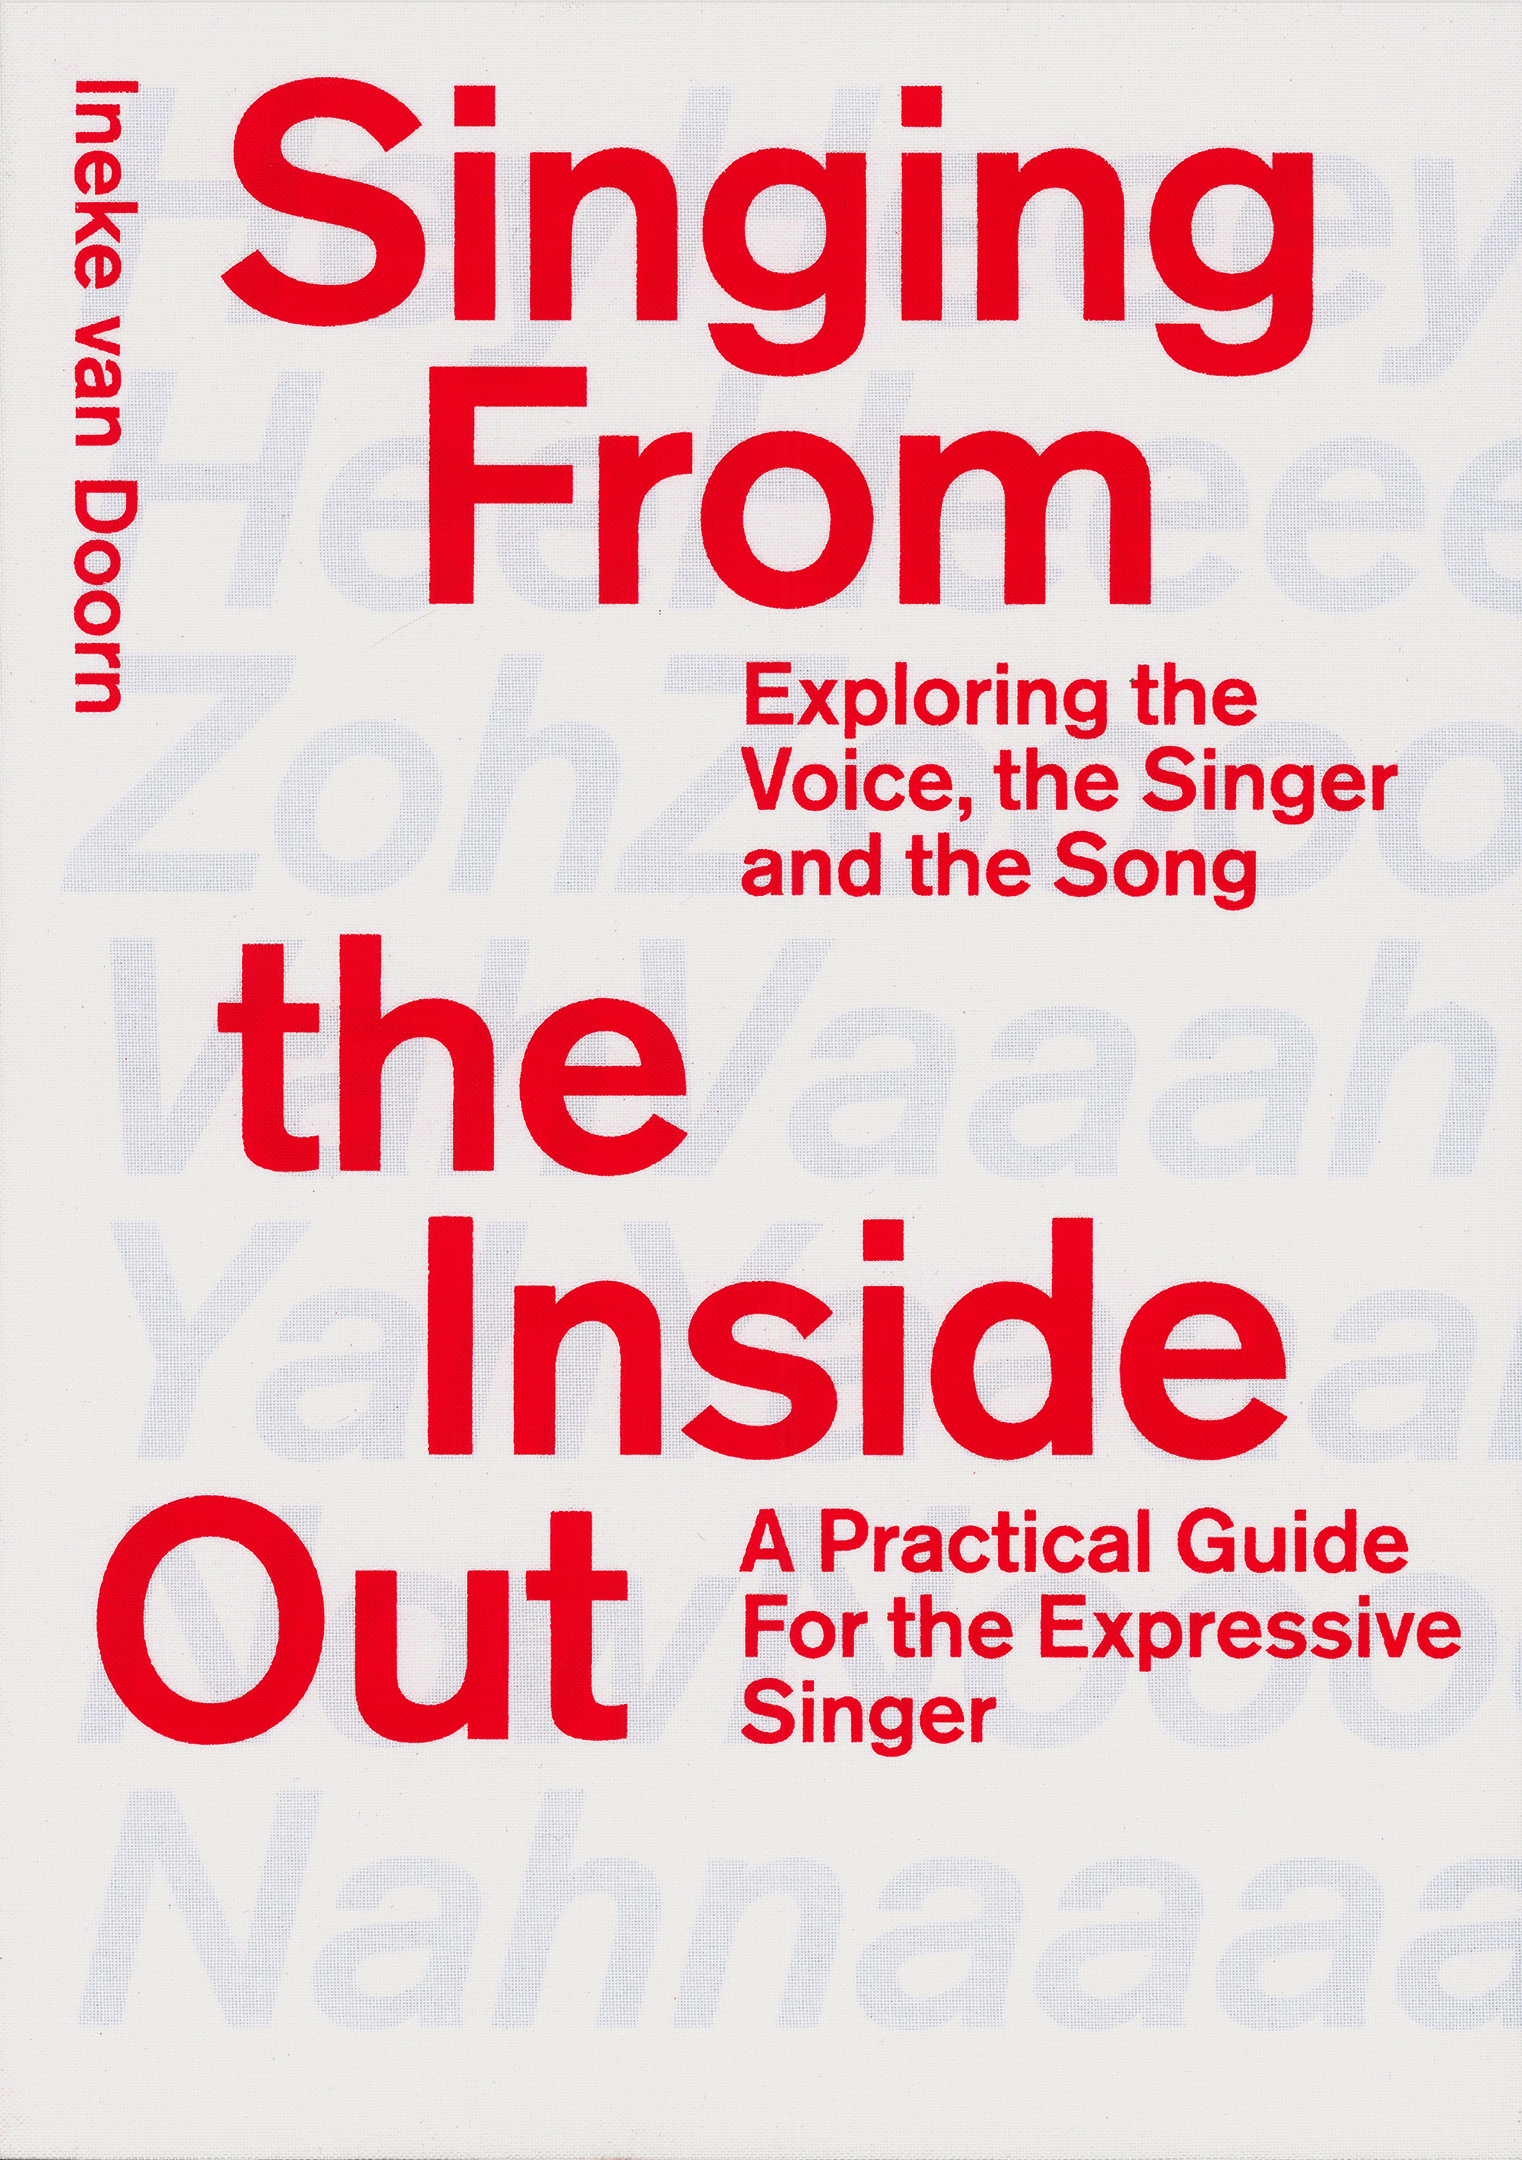 Singing from the Inside Out